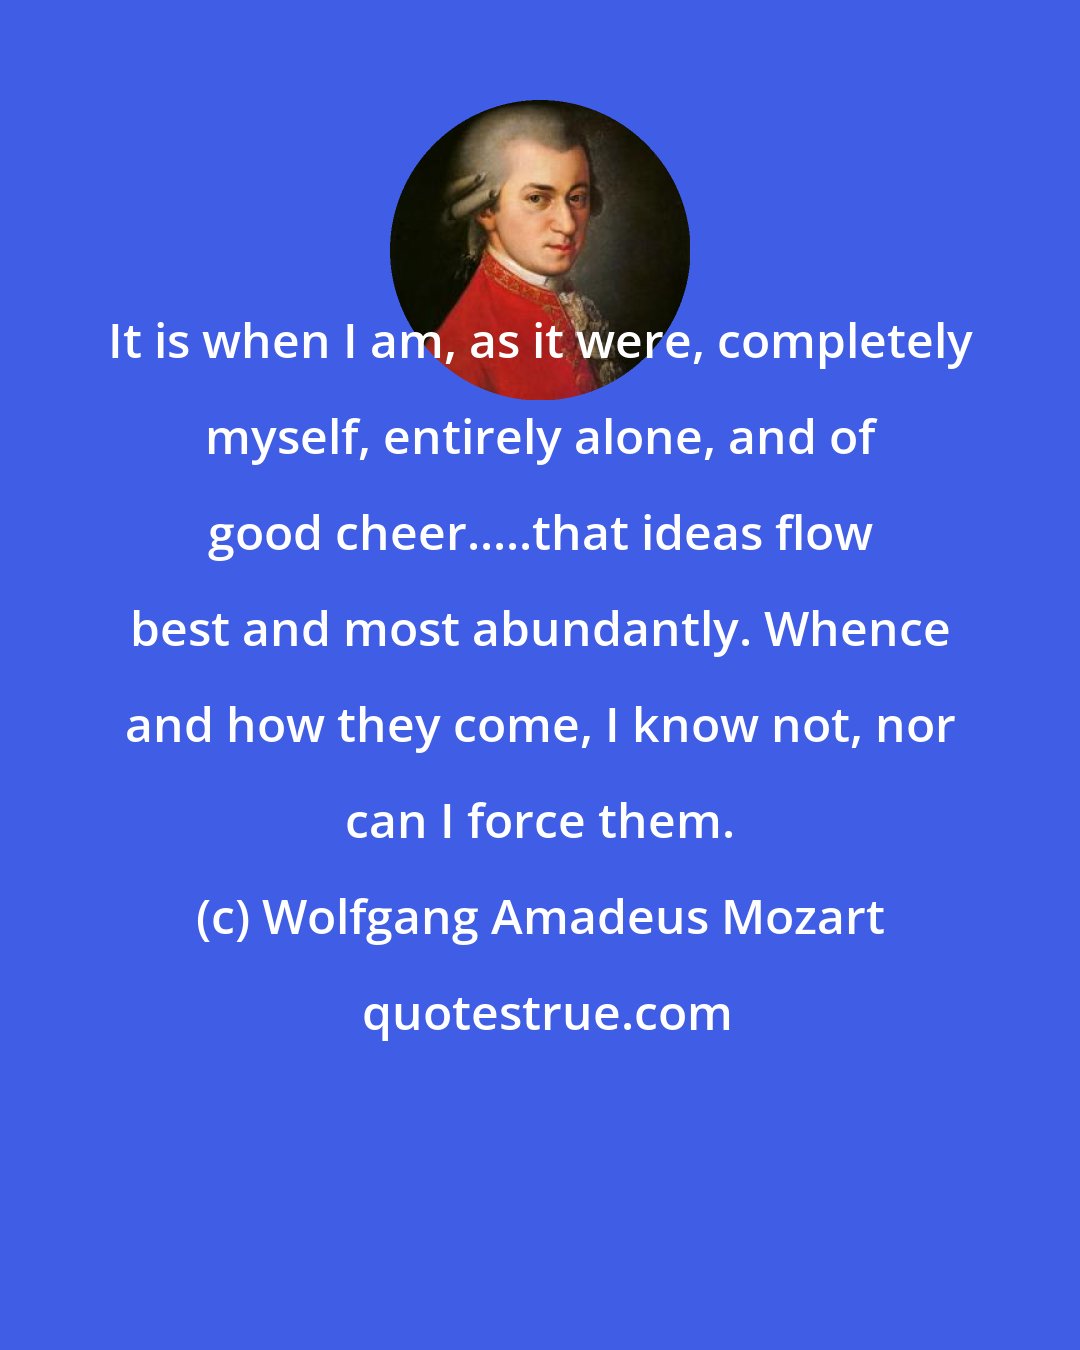 Wolfgang Amadeus Mozart: It is when I am, as it were, completely myself, entirely alone, and of good cheer.....that ideas flow best and most abundantly. Whence and how they come, I know not, nor can I force them.